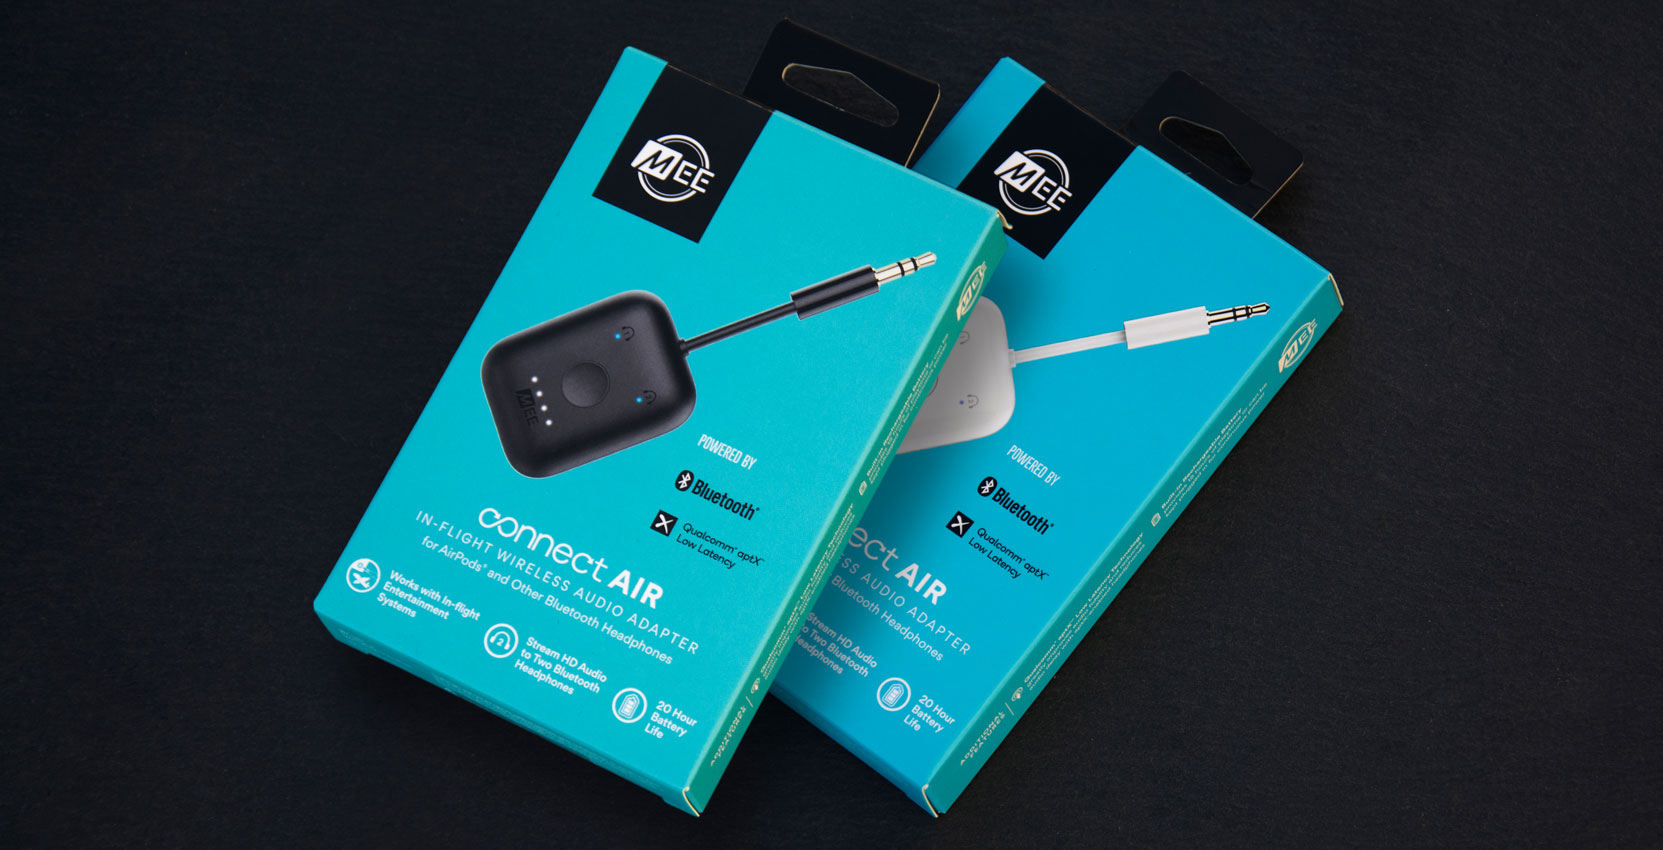 MEE audio Connect Air In-Flight Bluetooth Wireless Audio Transmitter Adapter